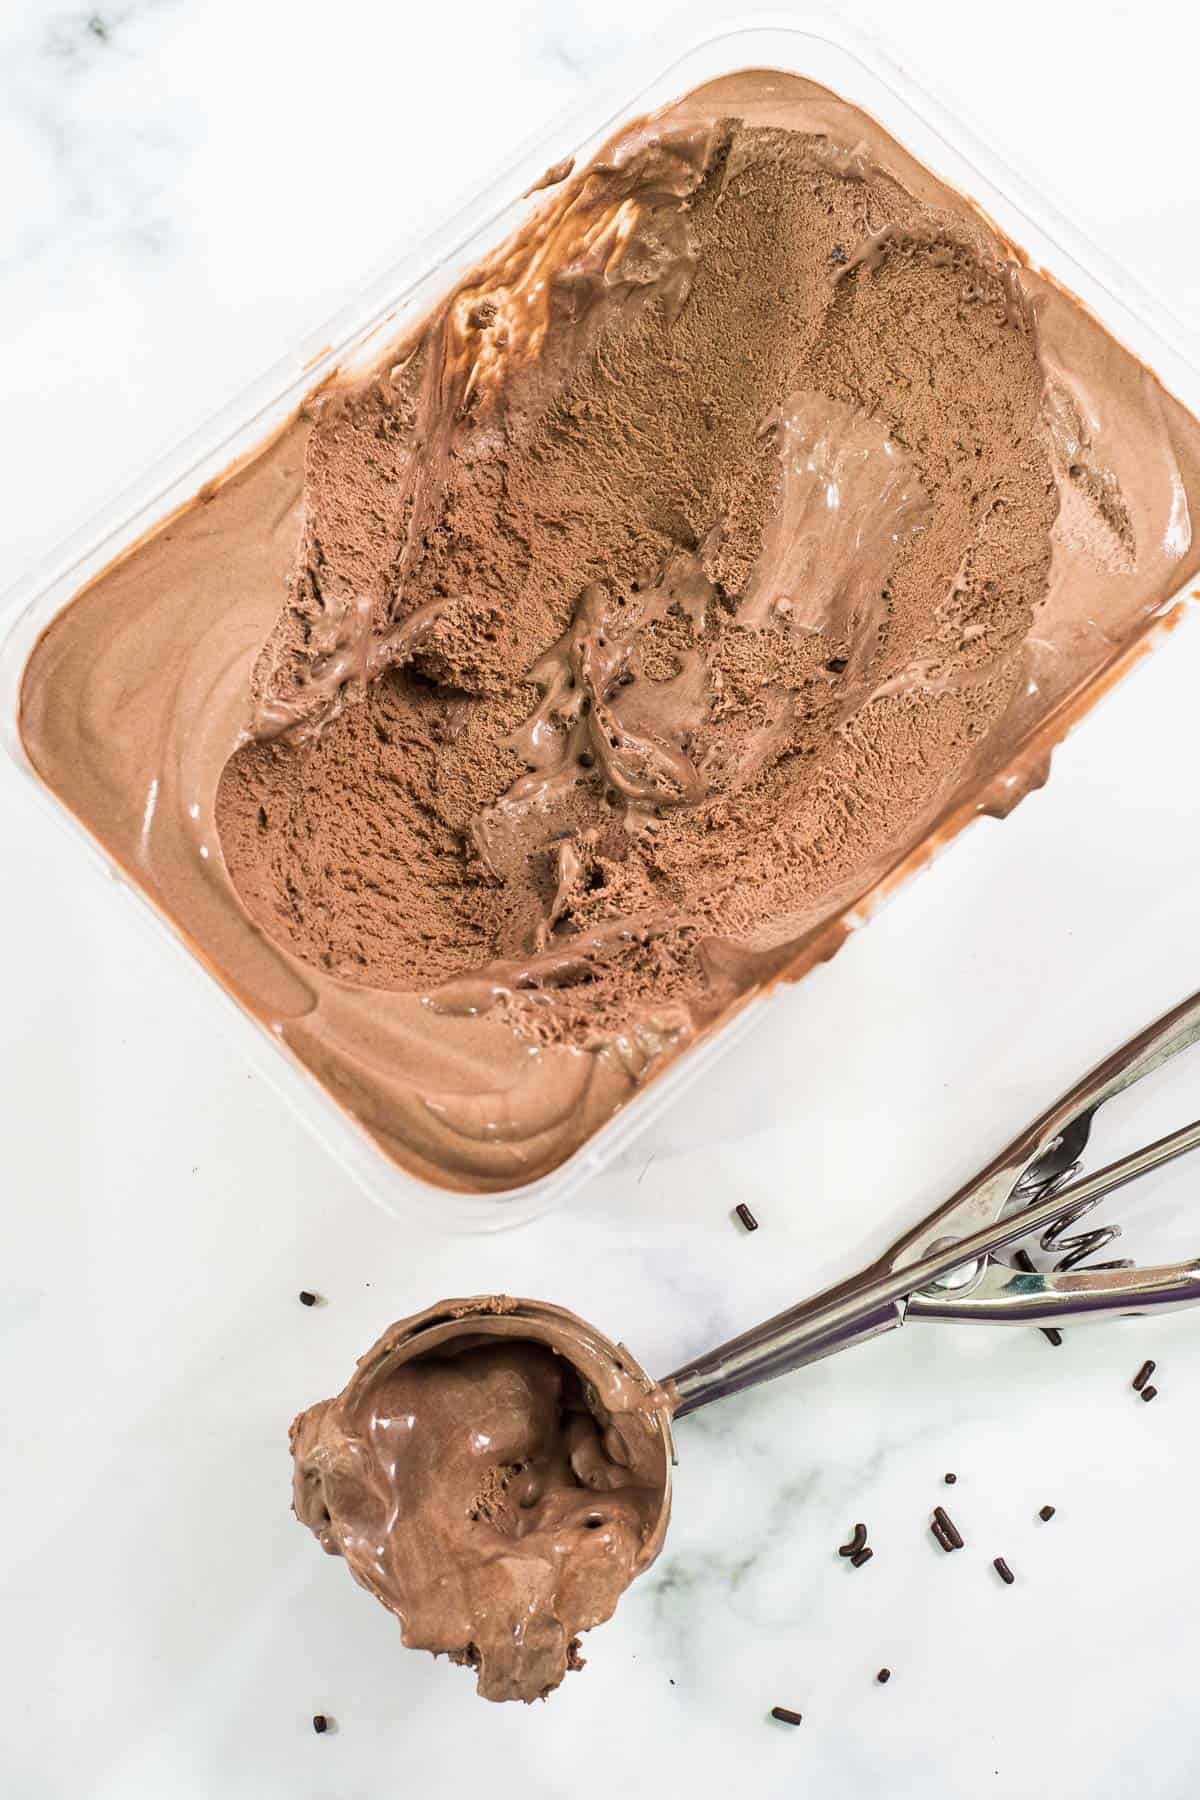 A tub of chocolate ice cream and ice cream scoop by the side